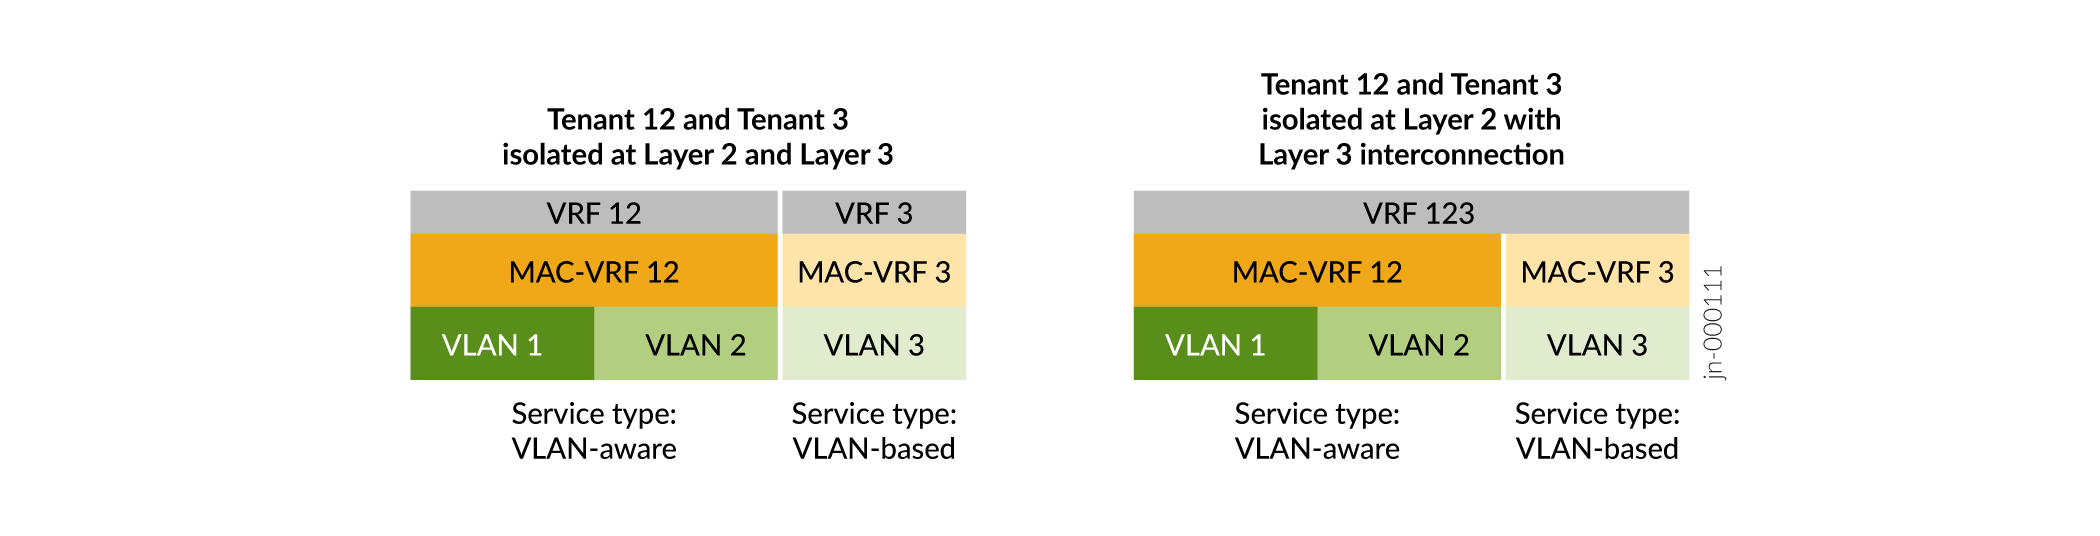 Flexible
Configuration Options at both Layer 2 and Layer 3 with MAC-VRF
Instances